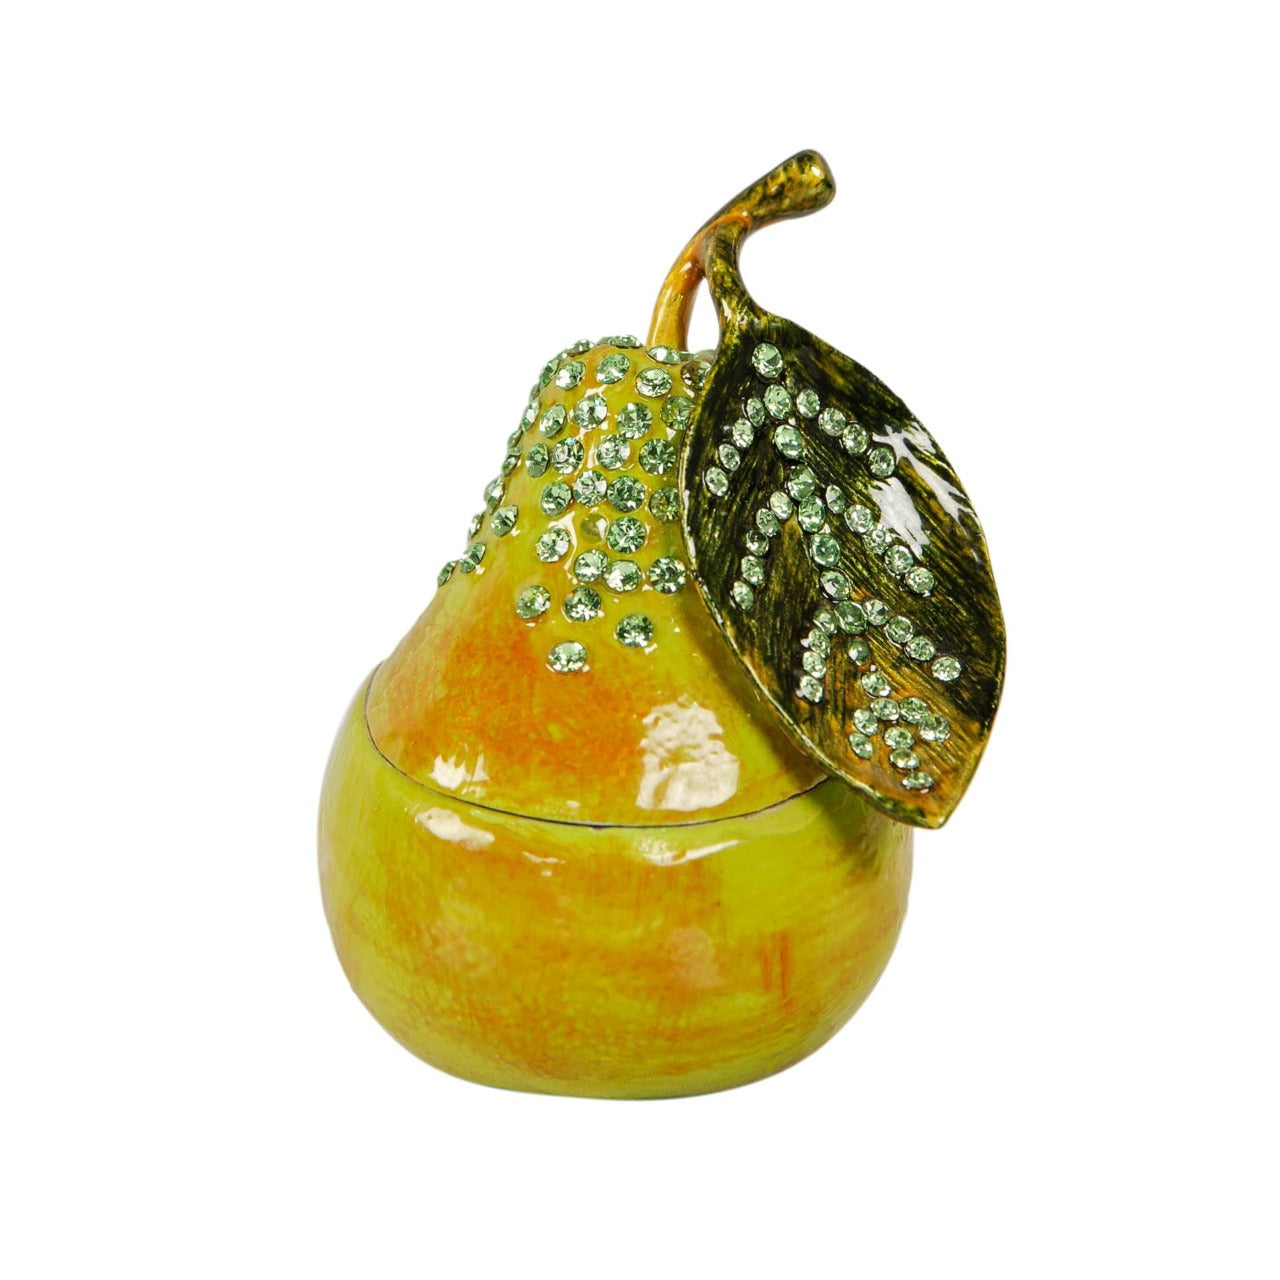 Treasured Trinket - Pear  A beautiful die-cast metal pear trinket box with crystal embellishments. From Treasured Trinkets by STRATTON® - hand painted, collectable trinkets to be treasured for a lifetime.